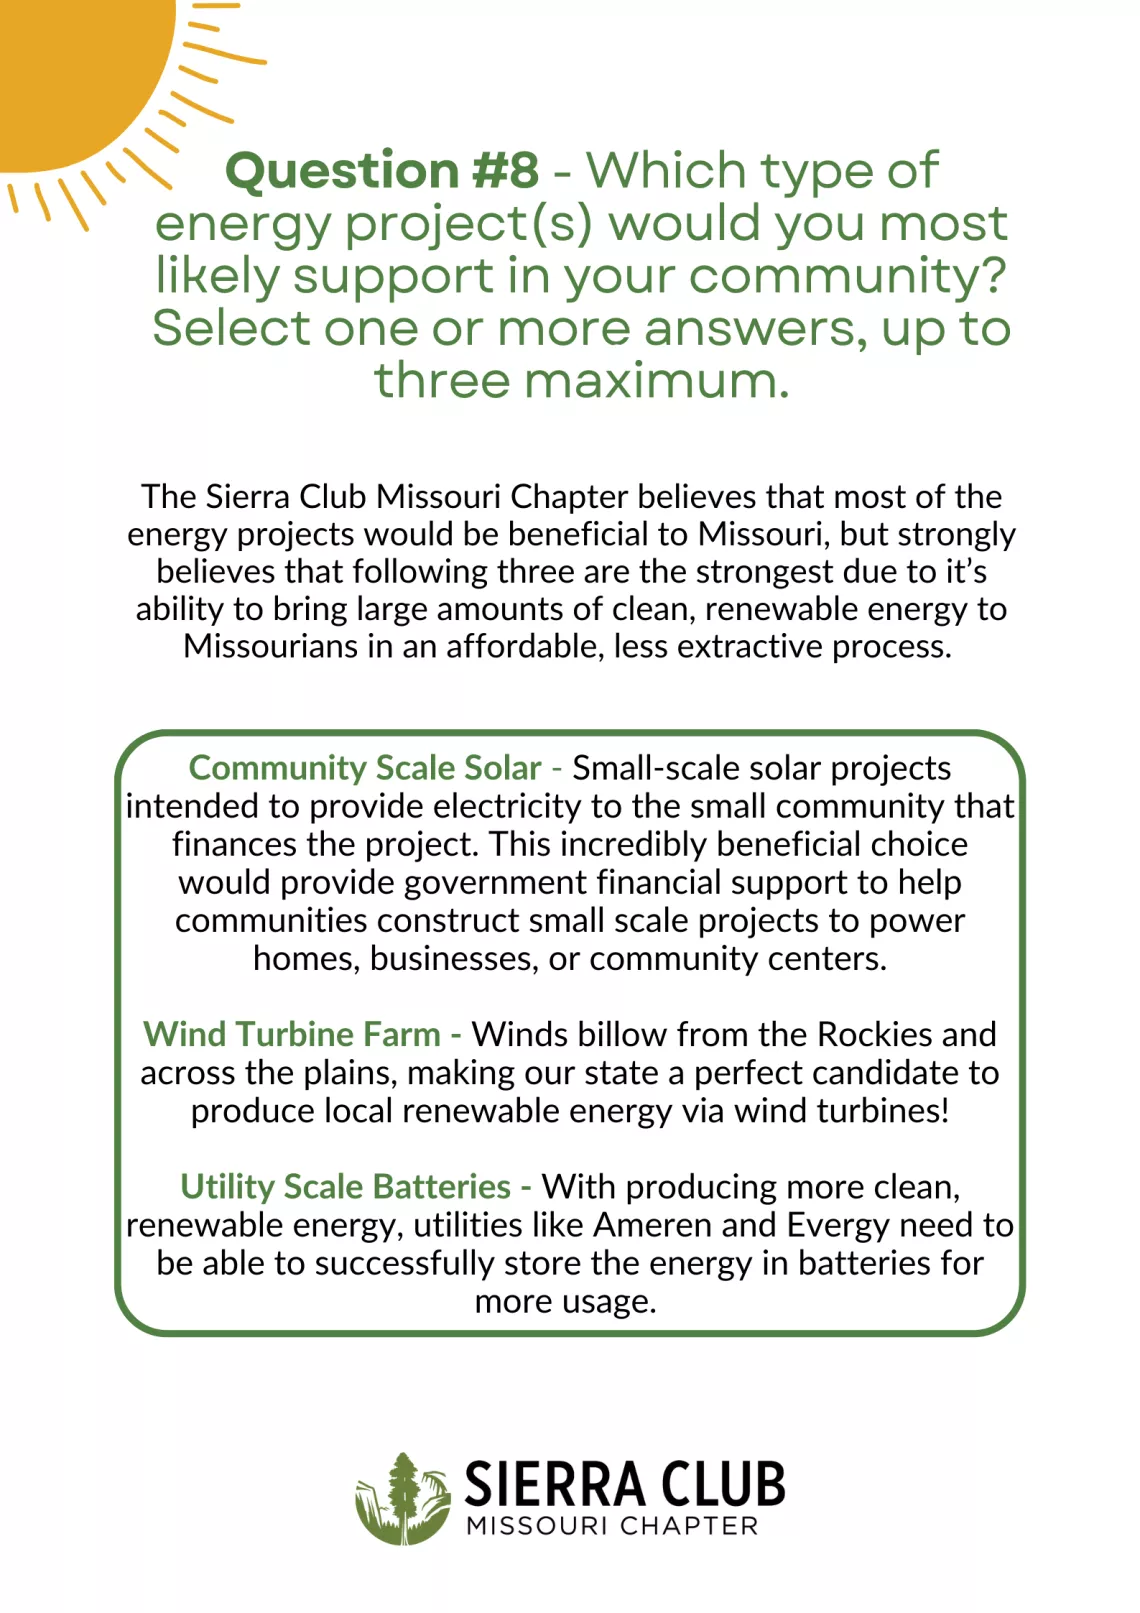 Question 8 - Why we support community solar, wind turbine, sand utility scale battery storage for Missouri!